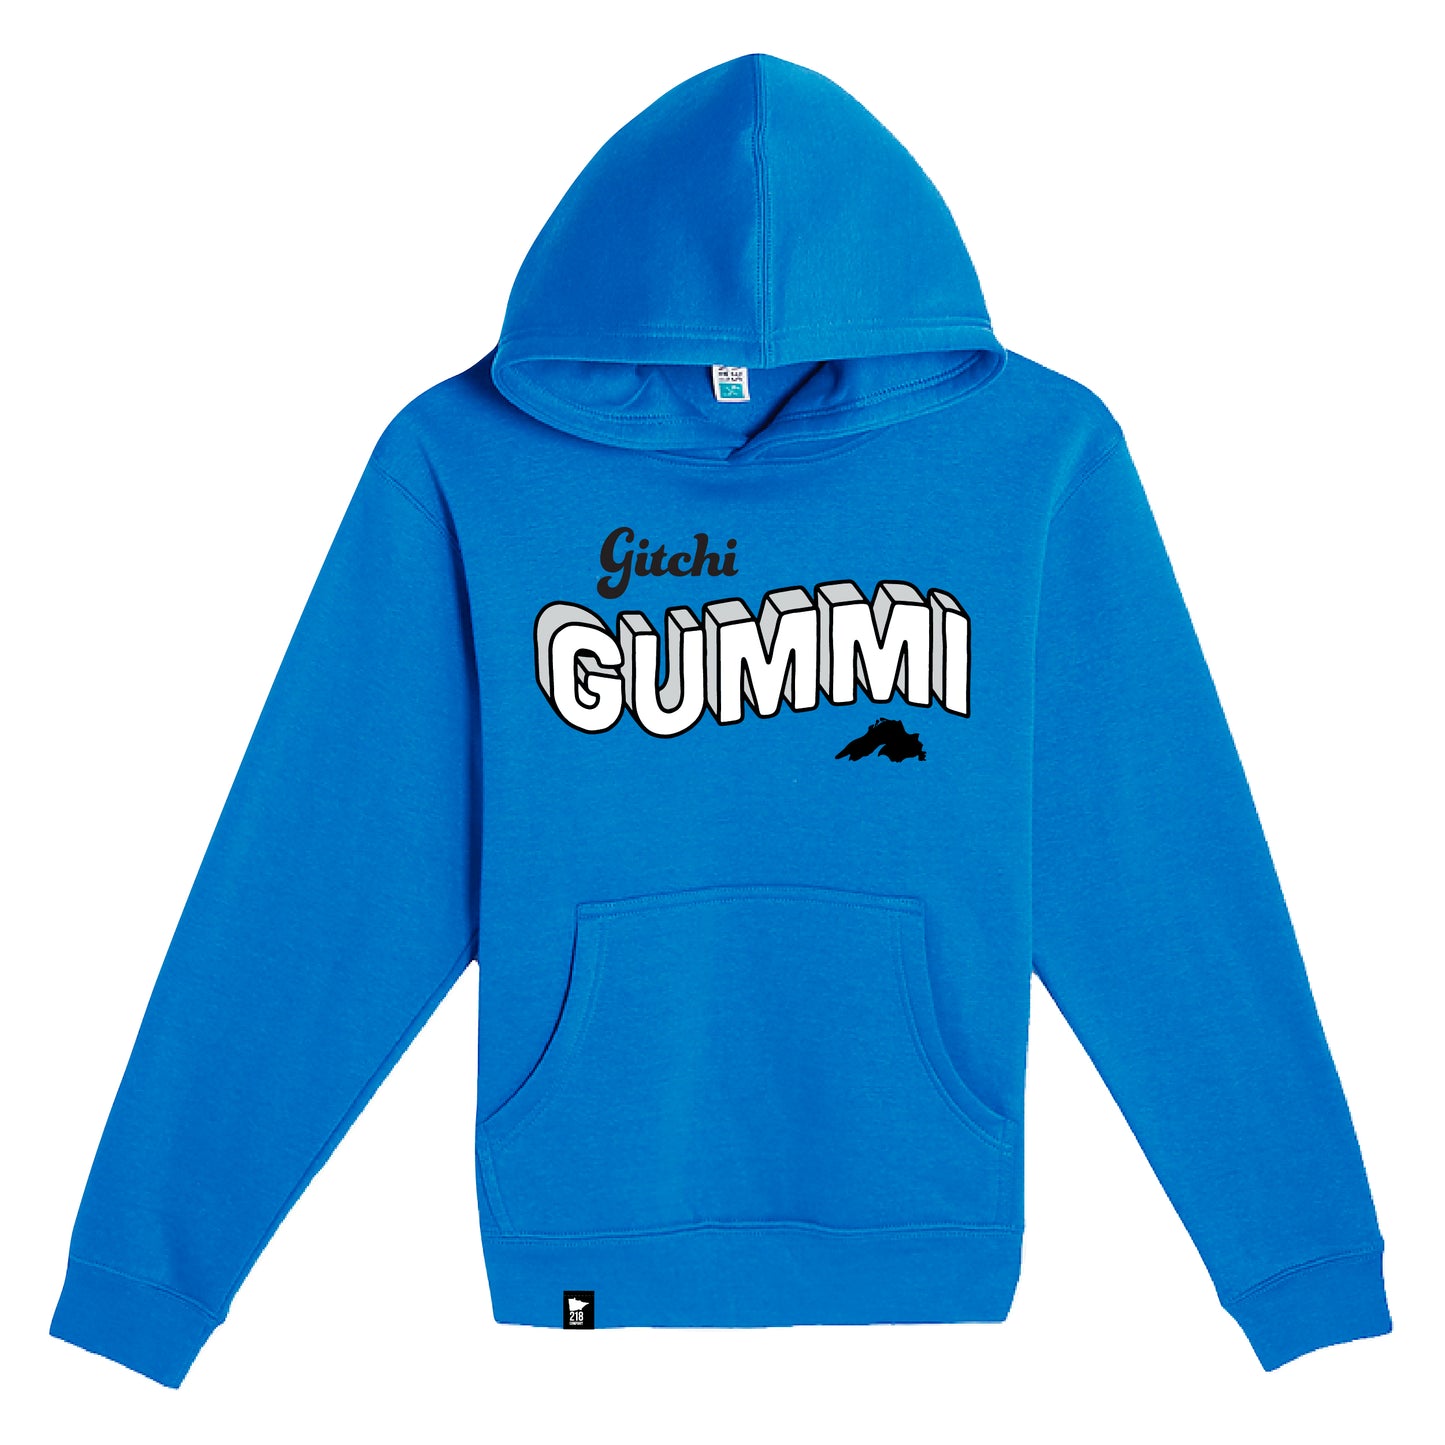 Cabin 1012 Premium Youth Pullover Hoodie